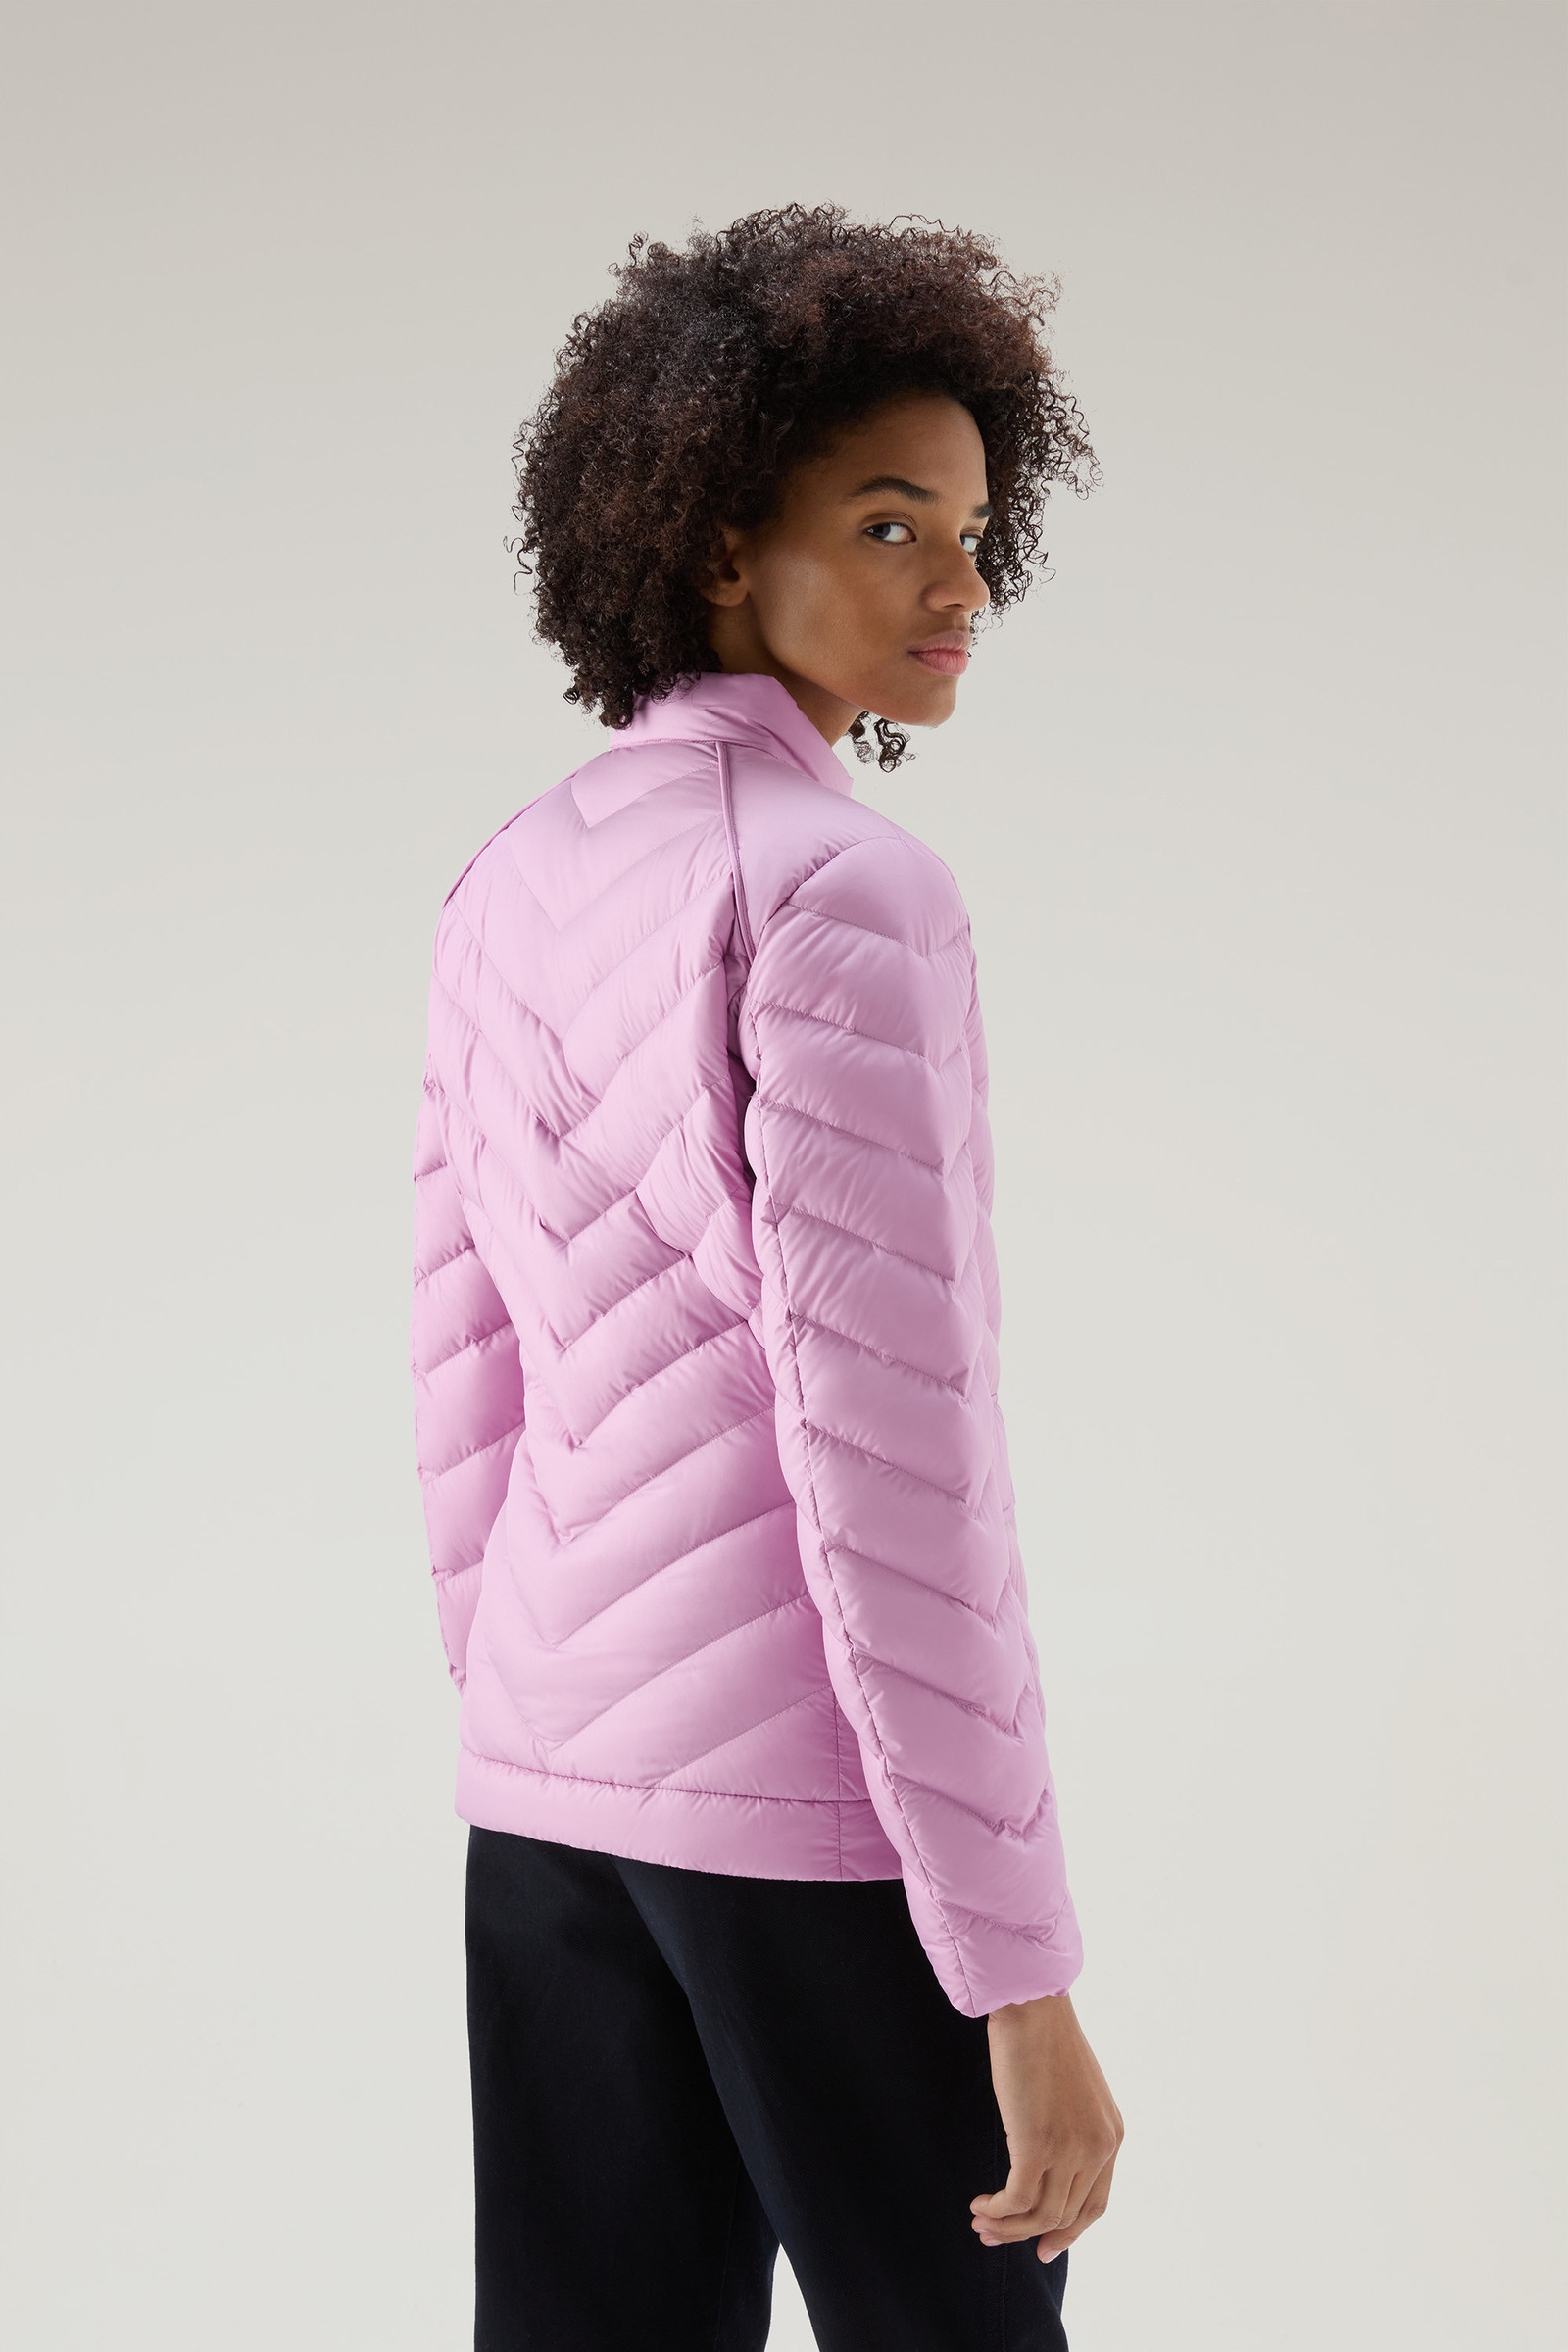 Woolrich Silas quilted jacket - Pink